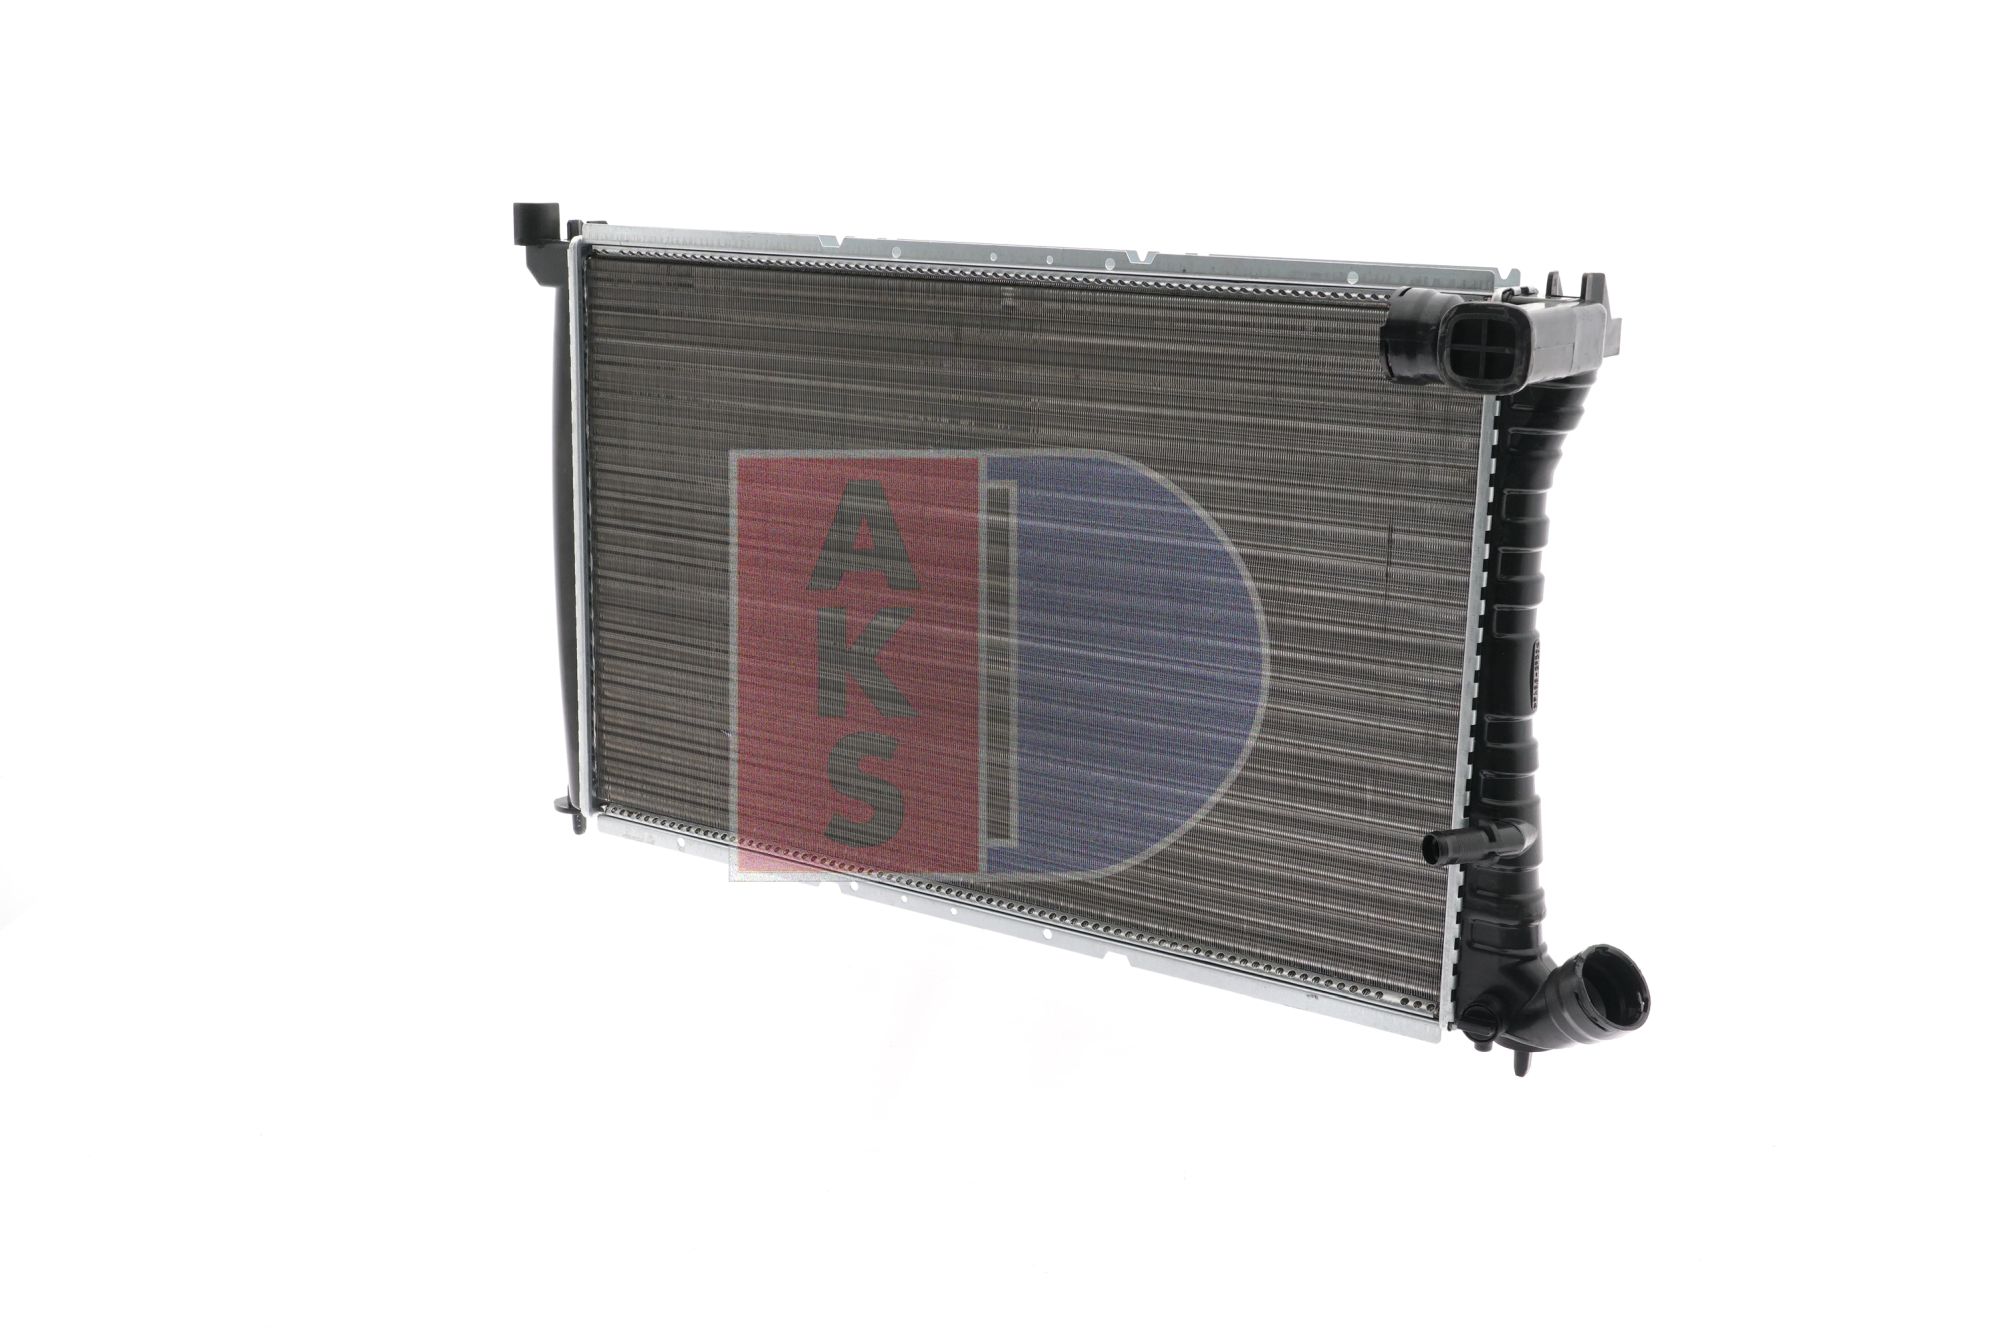 AKS DASIS 160350N Engine radiator 640 x 398 x 36 mm, Mechanically jointed cooling fins